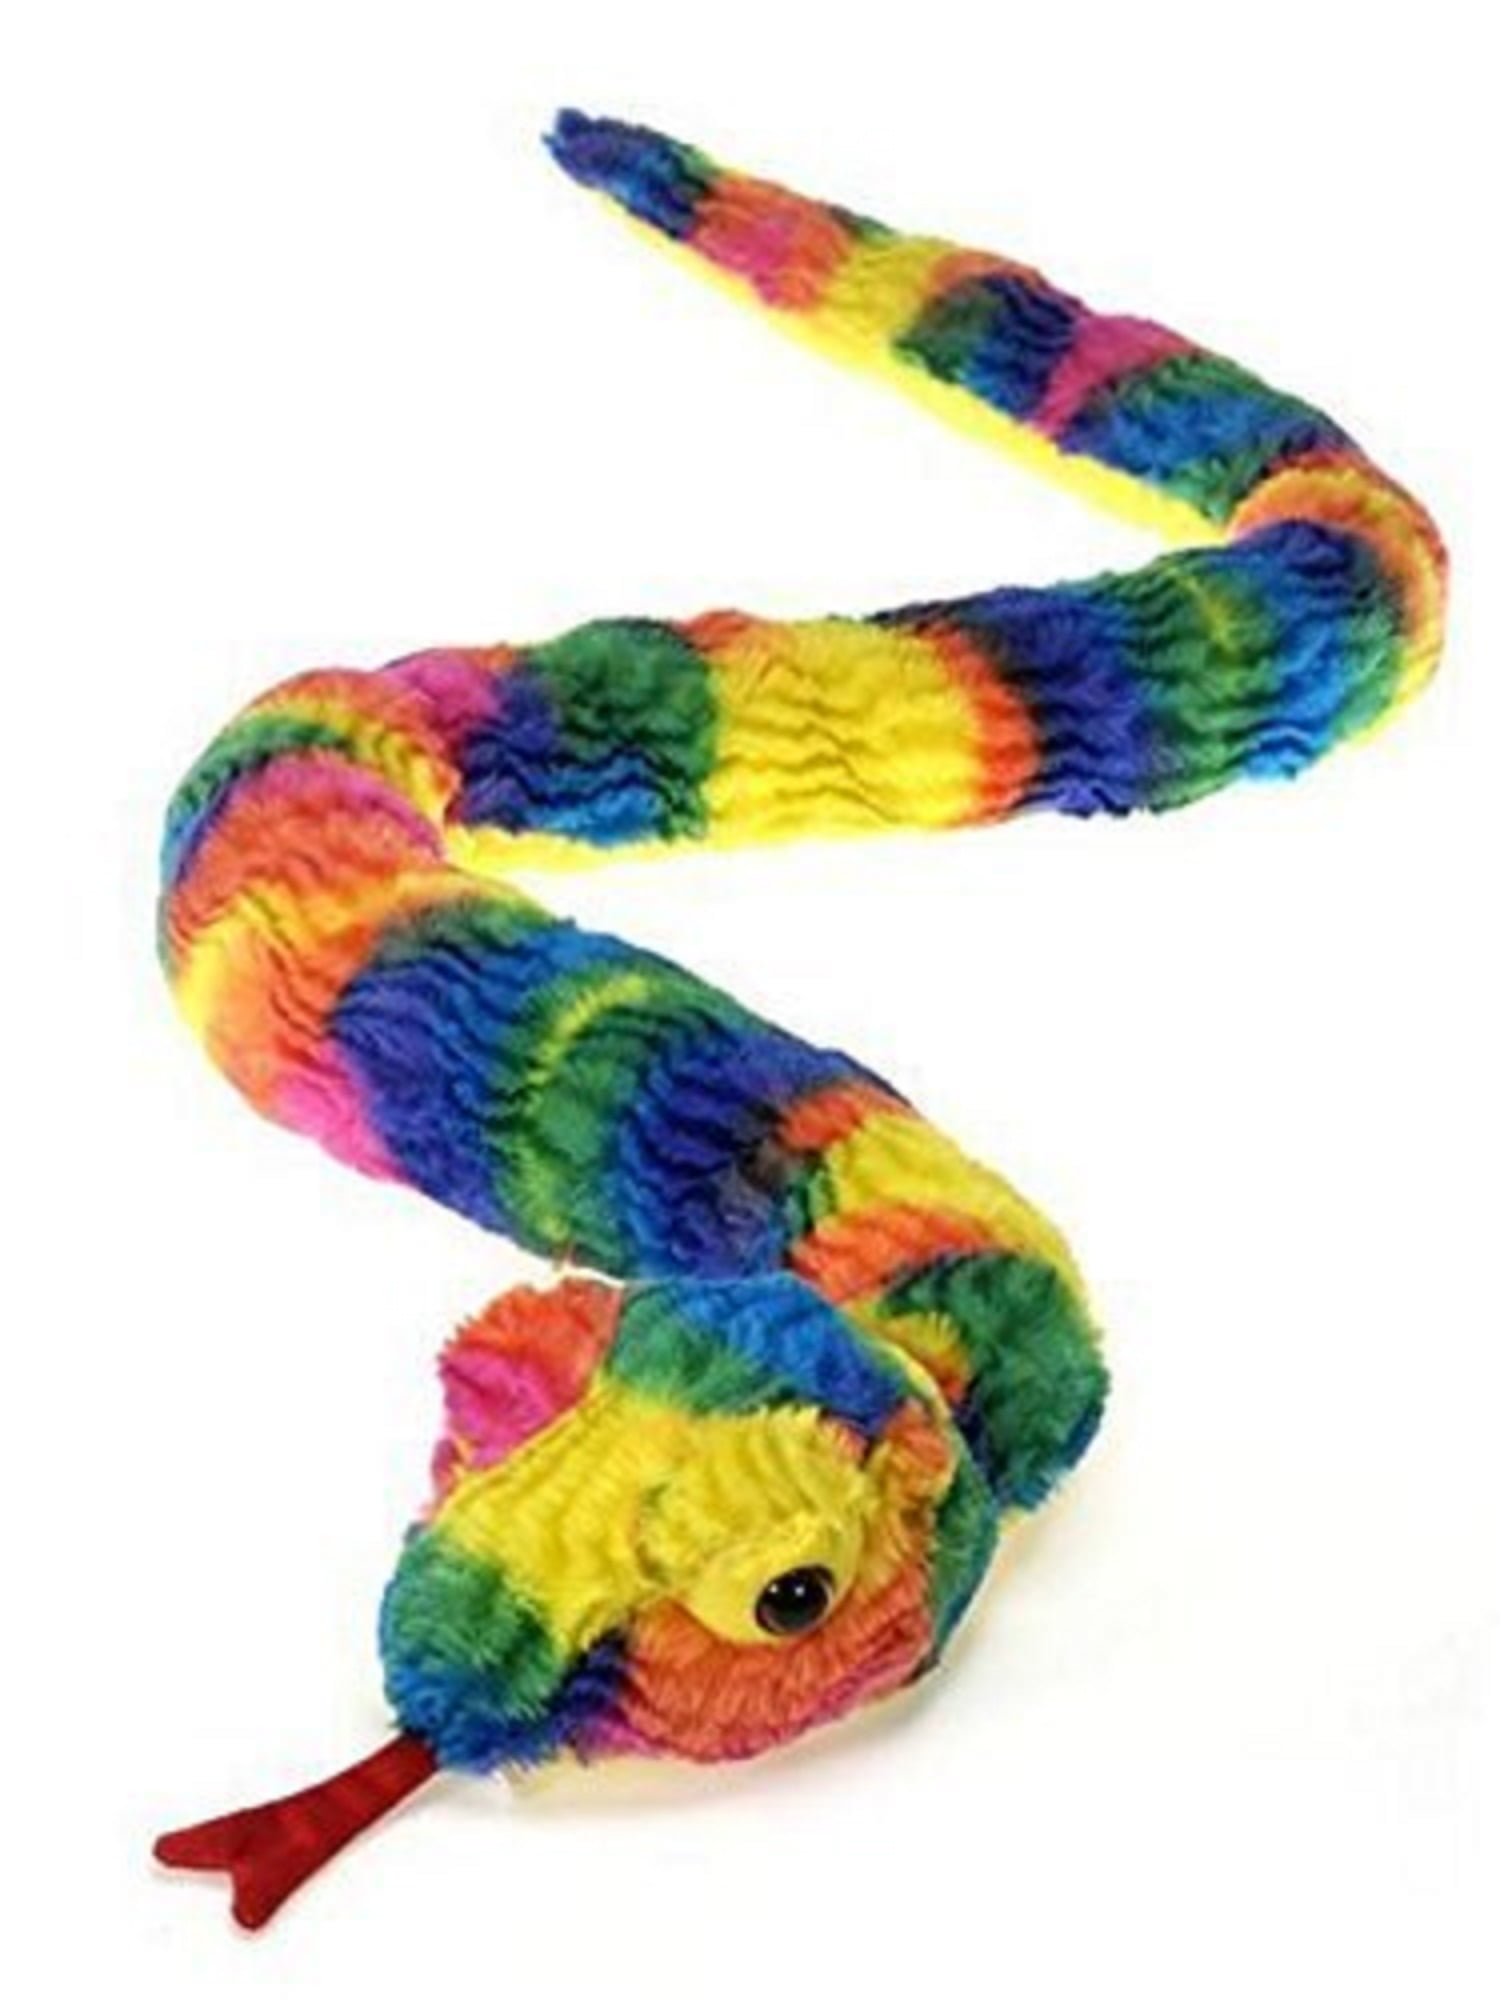 19" Rainbow Frosted Snake Plush Stuffed Animal Toys Kids Gifts Prizes 